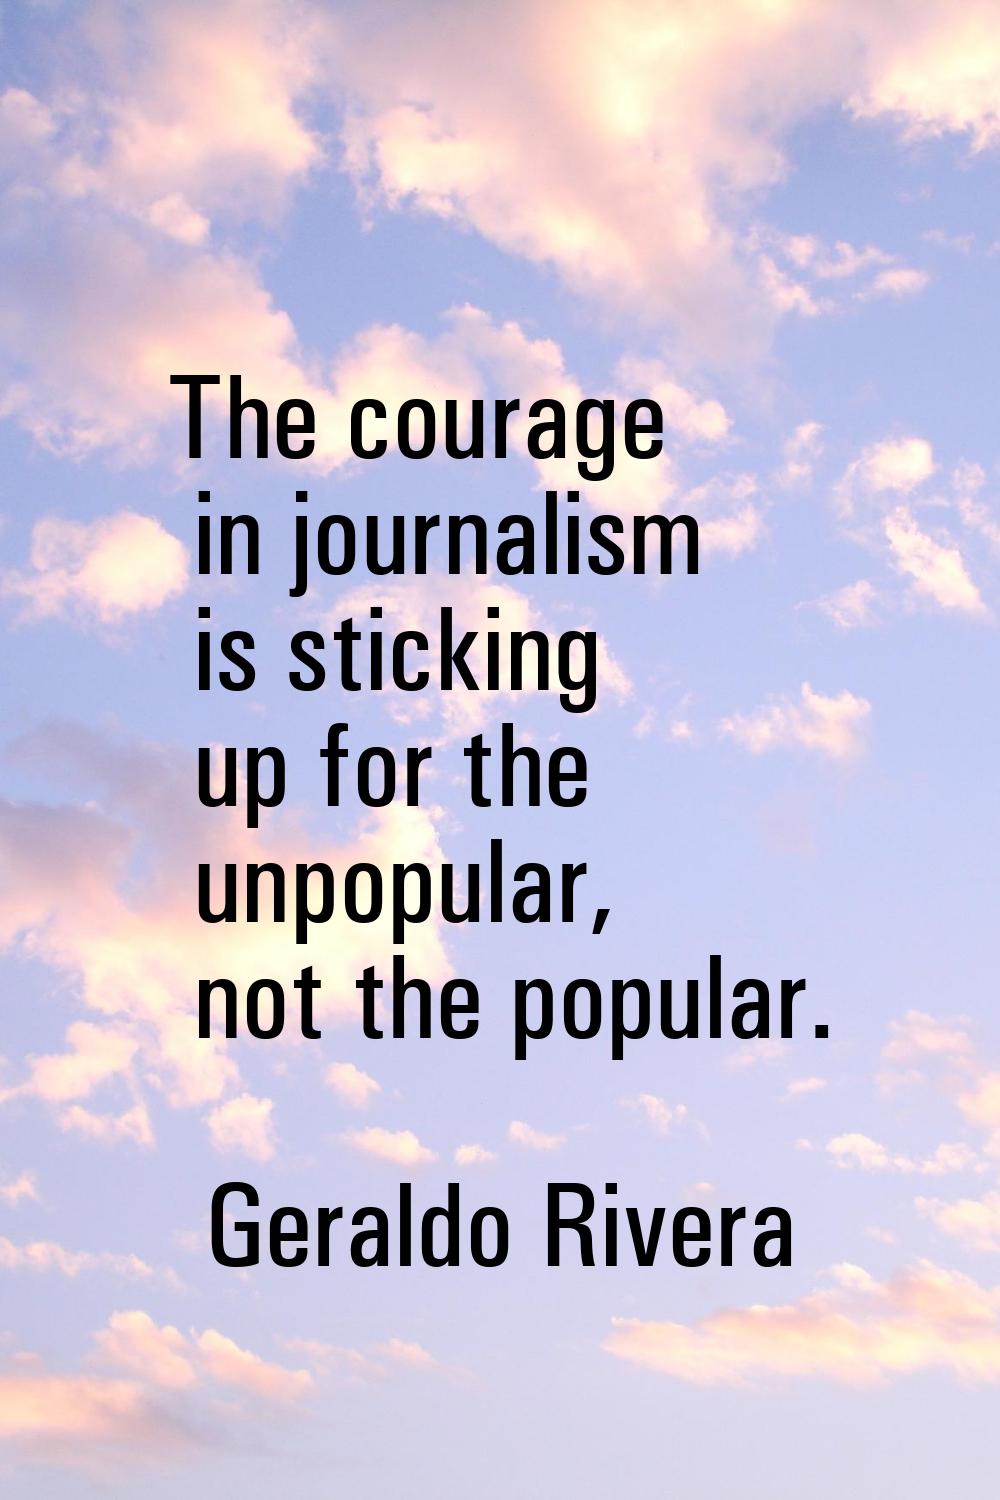 The courage in journalism is sticking up for the unpopular, not the popular.